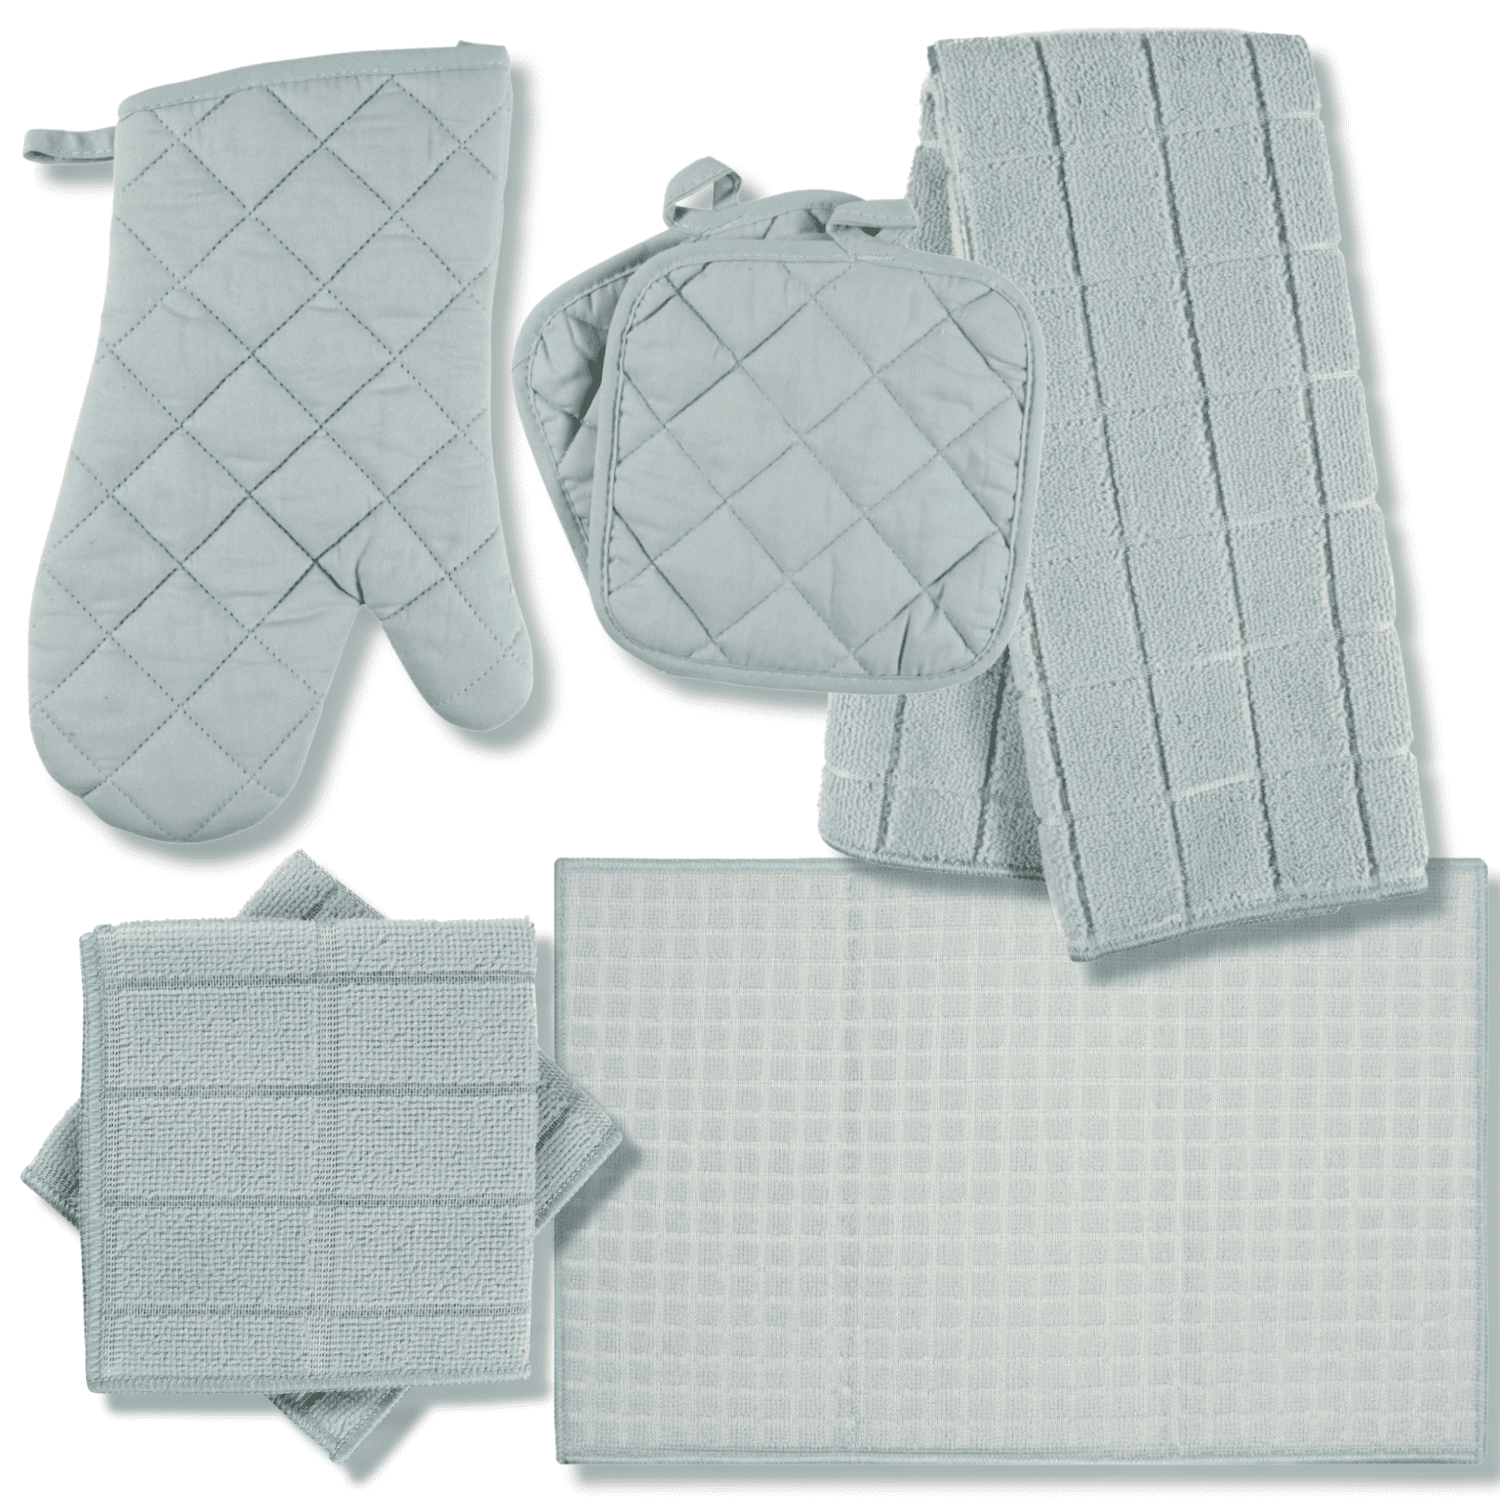 2 RAGS 2 POT HOLDERS,1 OVEN MITT & 2 TOWELS COFFEE BISTRO,MS Details about   7 pc KITCHEN SET 